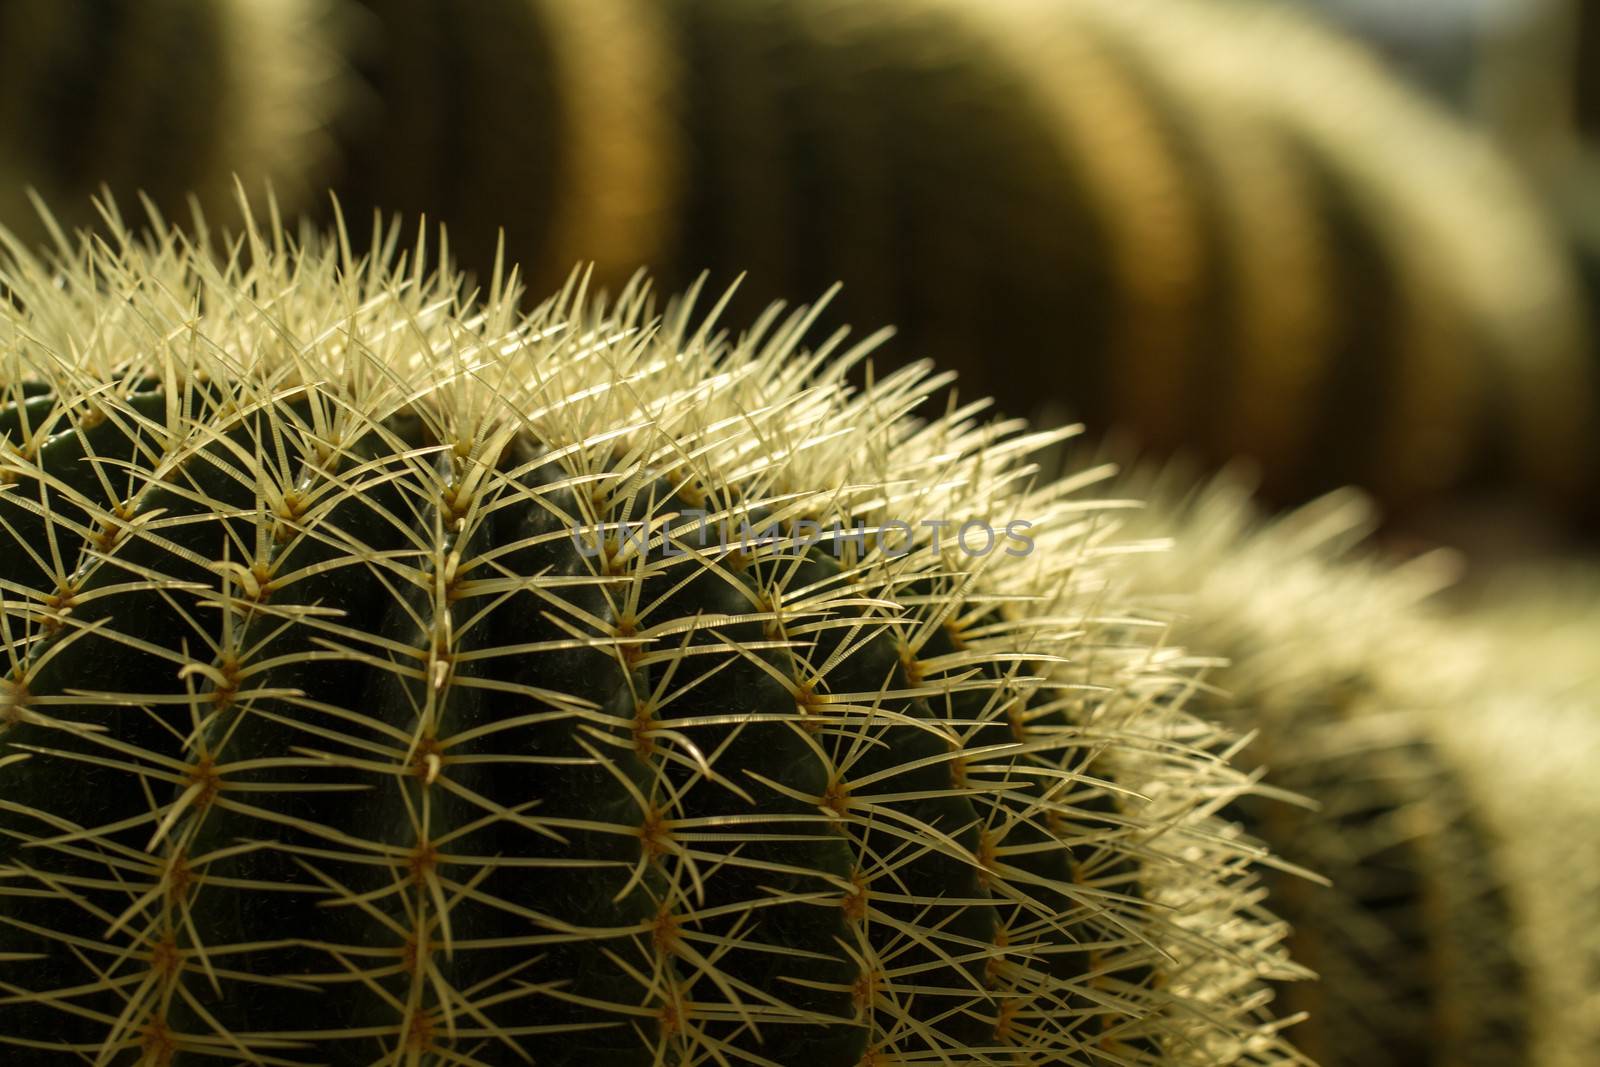 Cactus Thorn Close up II by azamshah72